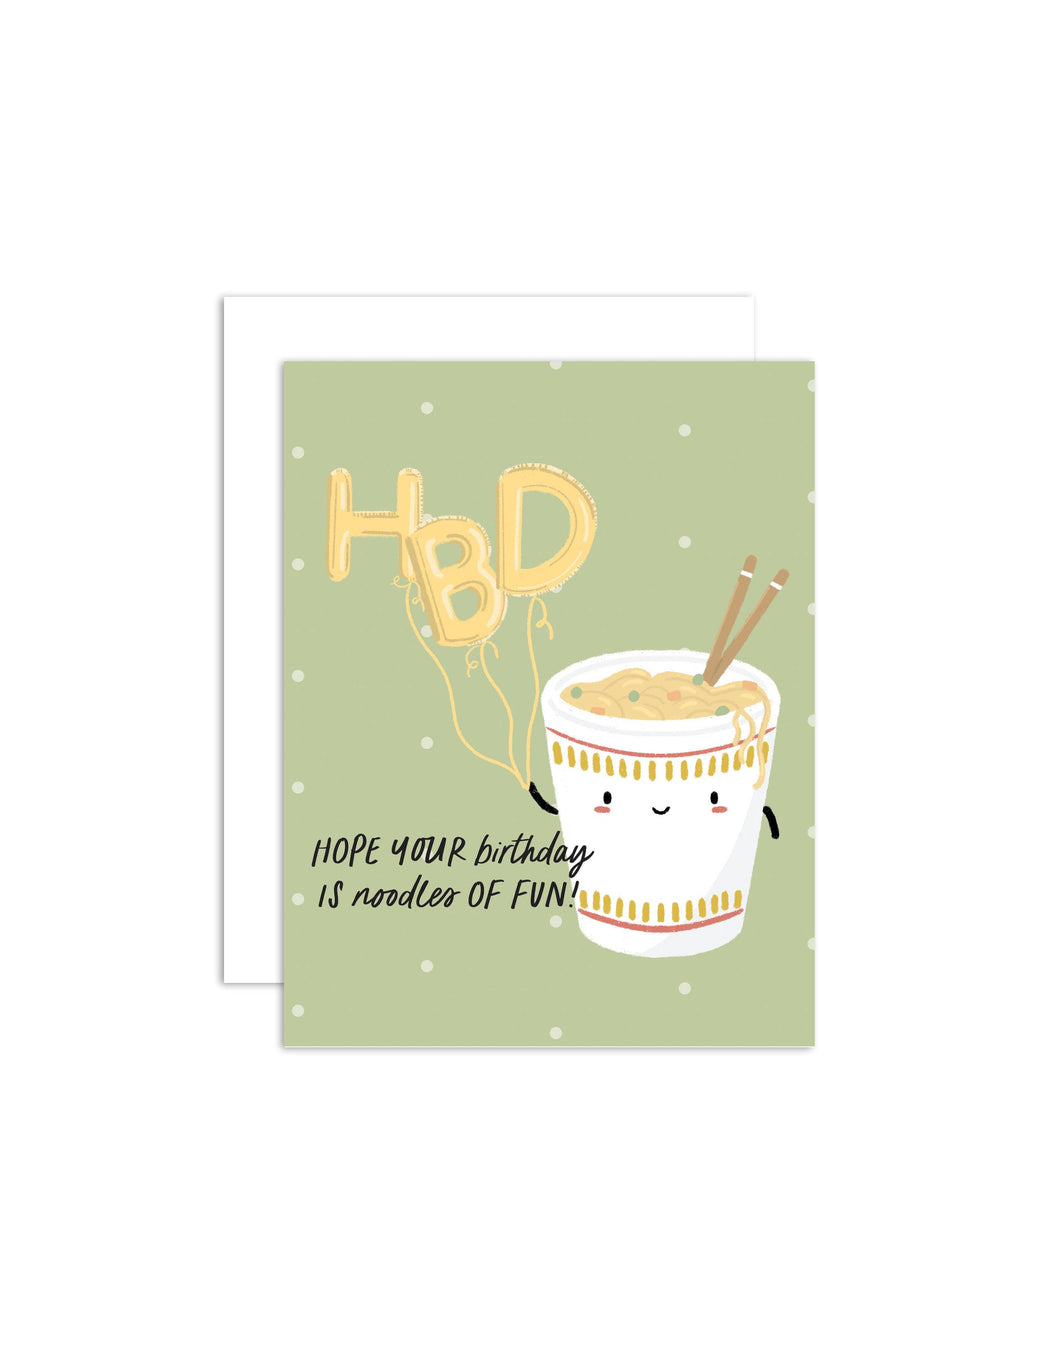 Noodles of Fun - Birthday Greeting Card